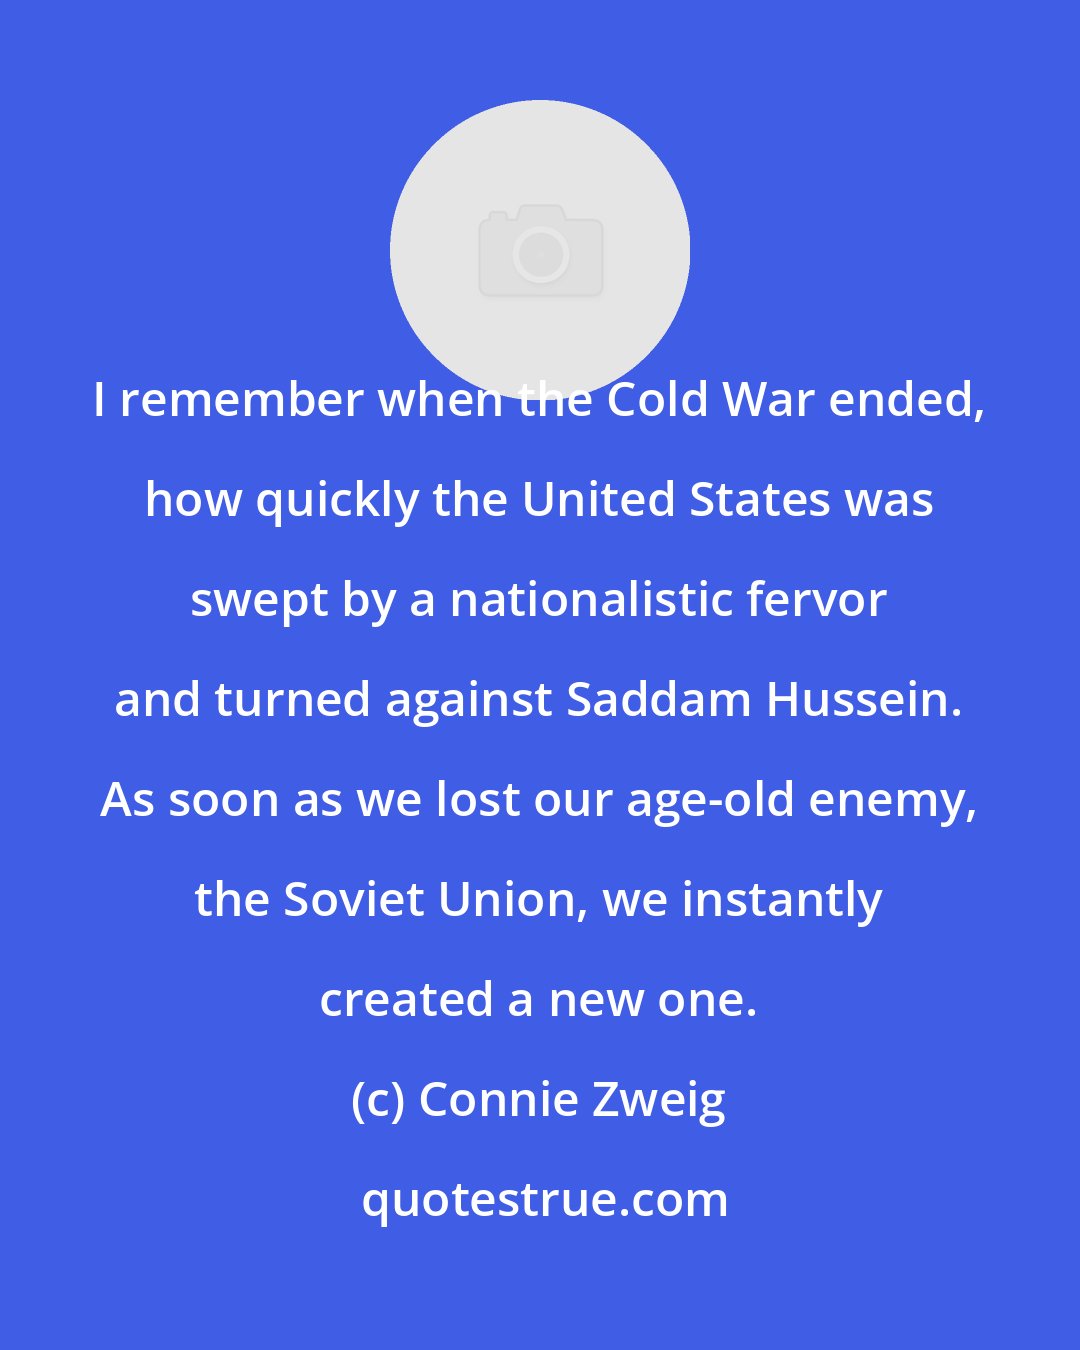 Connie Zweig: I remember when the Cold War ended, how quickly the United States was swept by a nationalistic fervor and turned against Saddam Hussein. As soon as we lost our age-old enemy, the Soviet Union, we instantly created a new one.